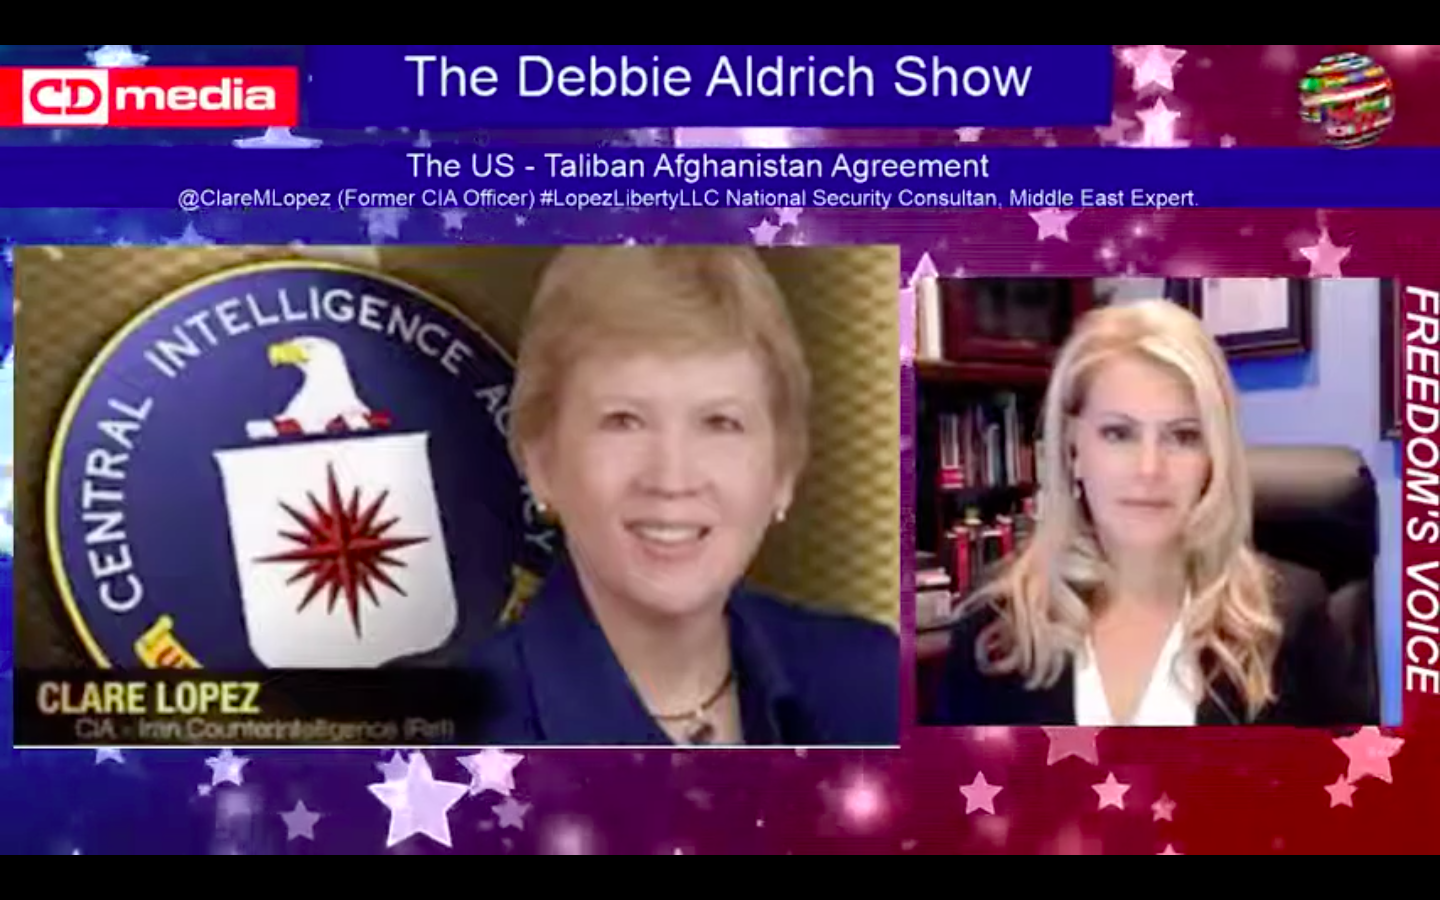 Debbie Aldrich Show - Former CIA Officer Clare Lopez Discusses Afghan Cease Fire Agreement